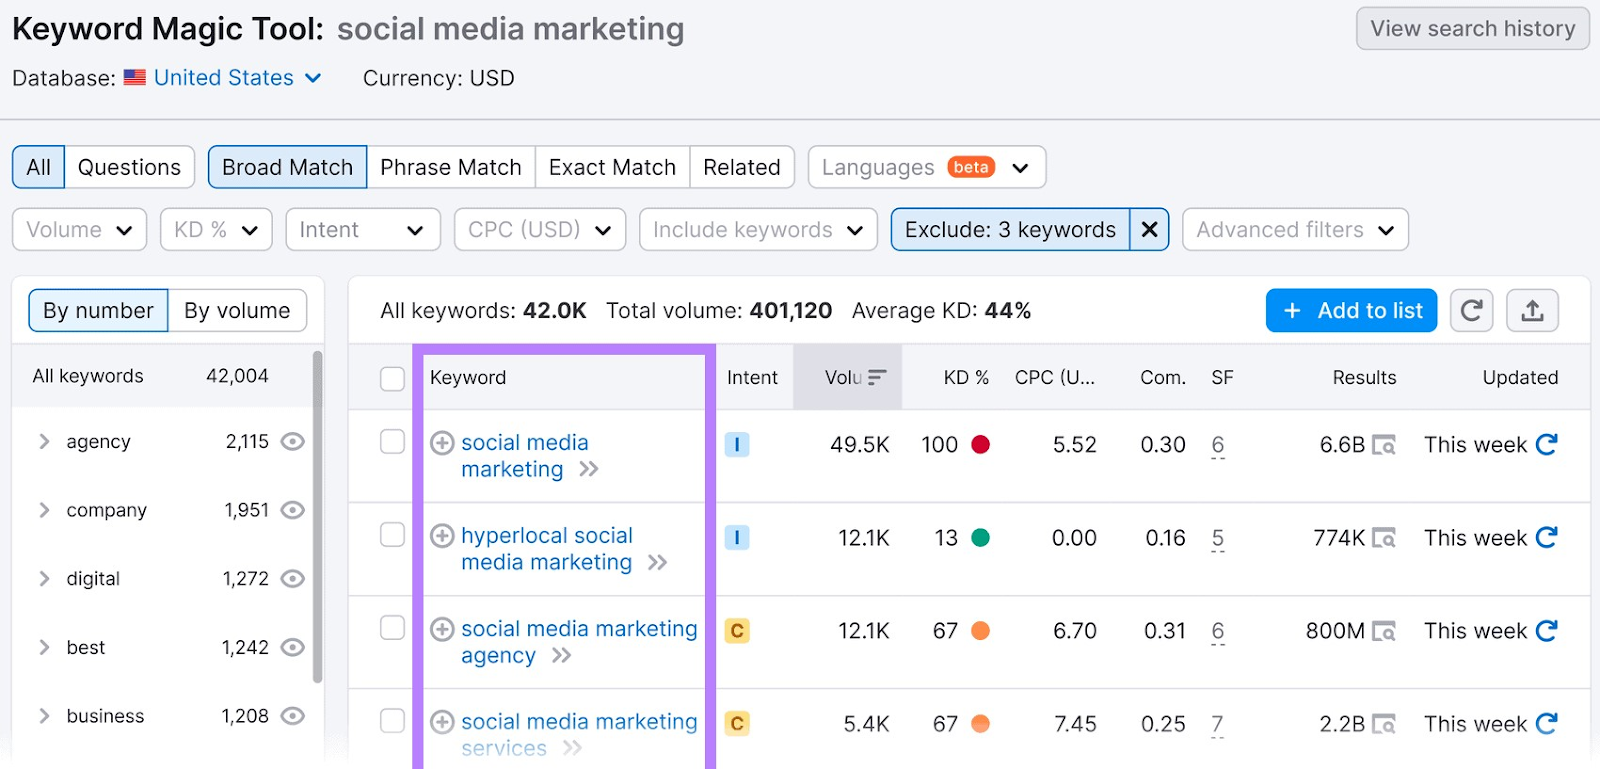 Keyword Magic Tool results for "social media marketing" with selected keywords excluded from the list